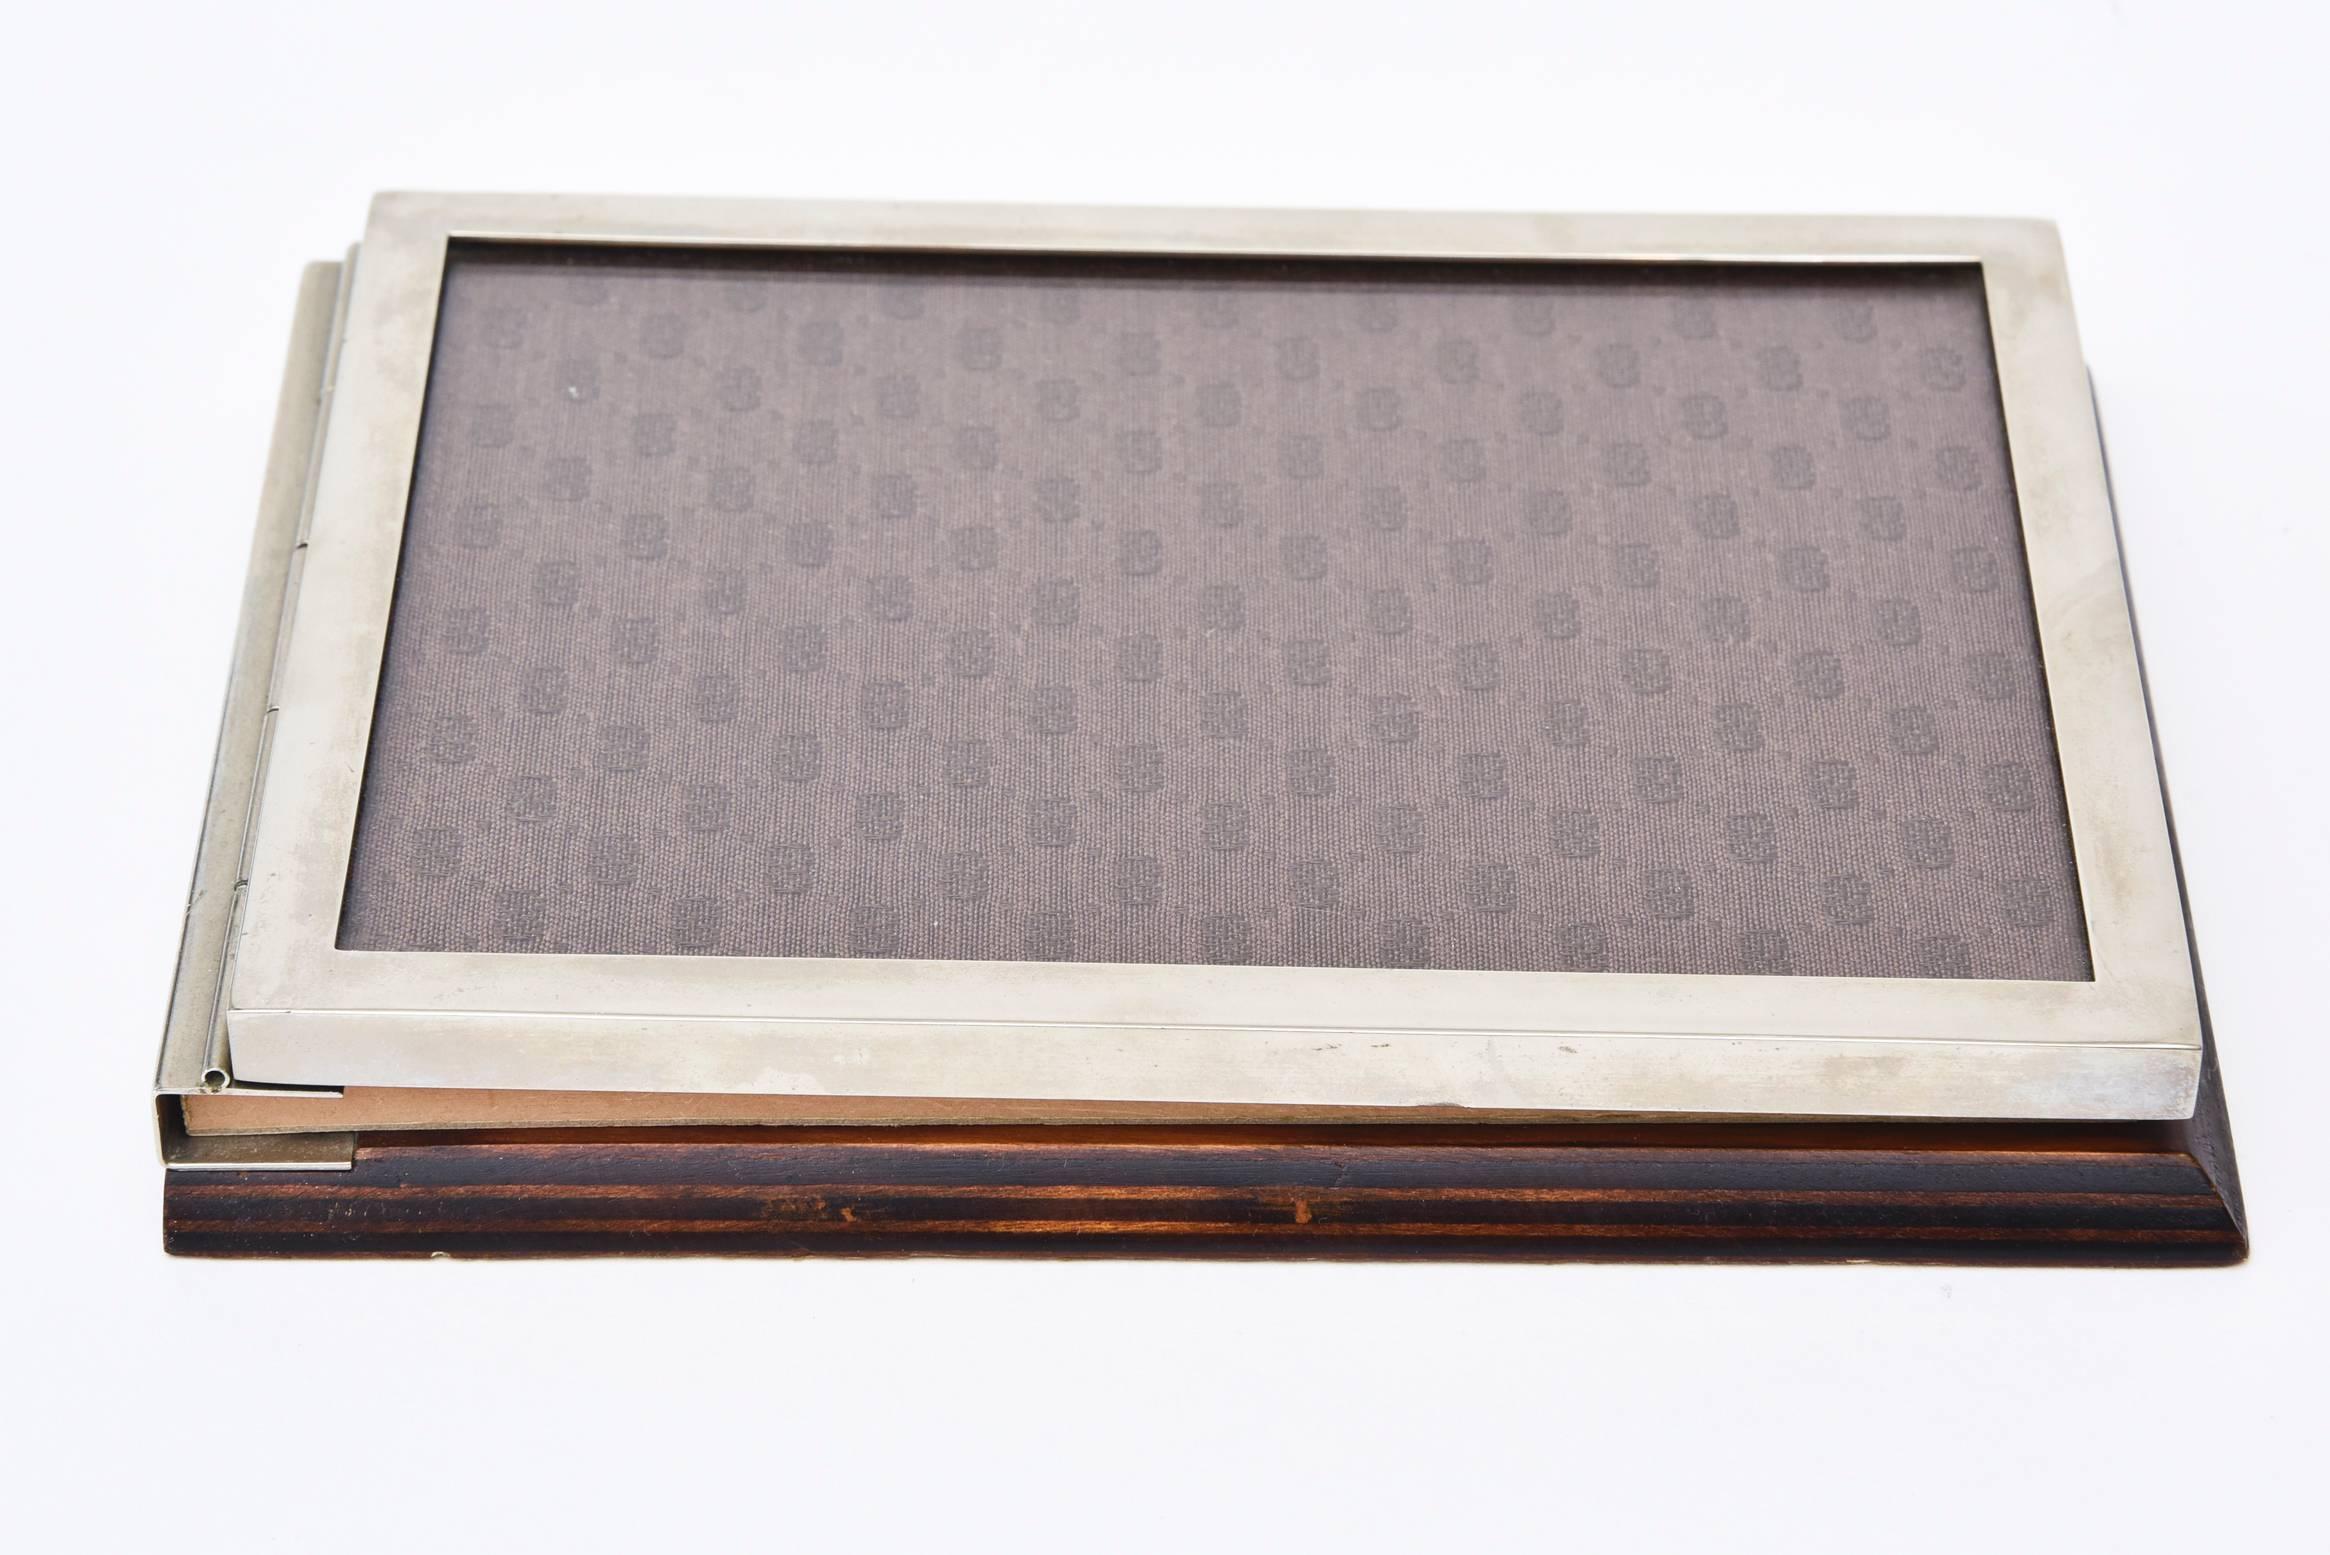 This wonderful vintage Italian signed Gucci note pad holder has wood backing with flip topnote holder and the iconic logo fabric Gucci symbols as the front. It is darker brown on lighter brown. Inside the flap is a black melamine. The original note